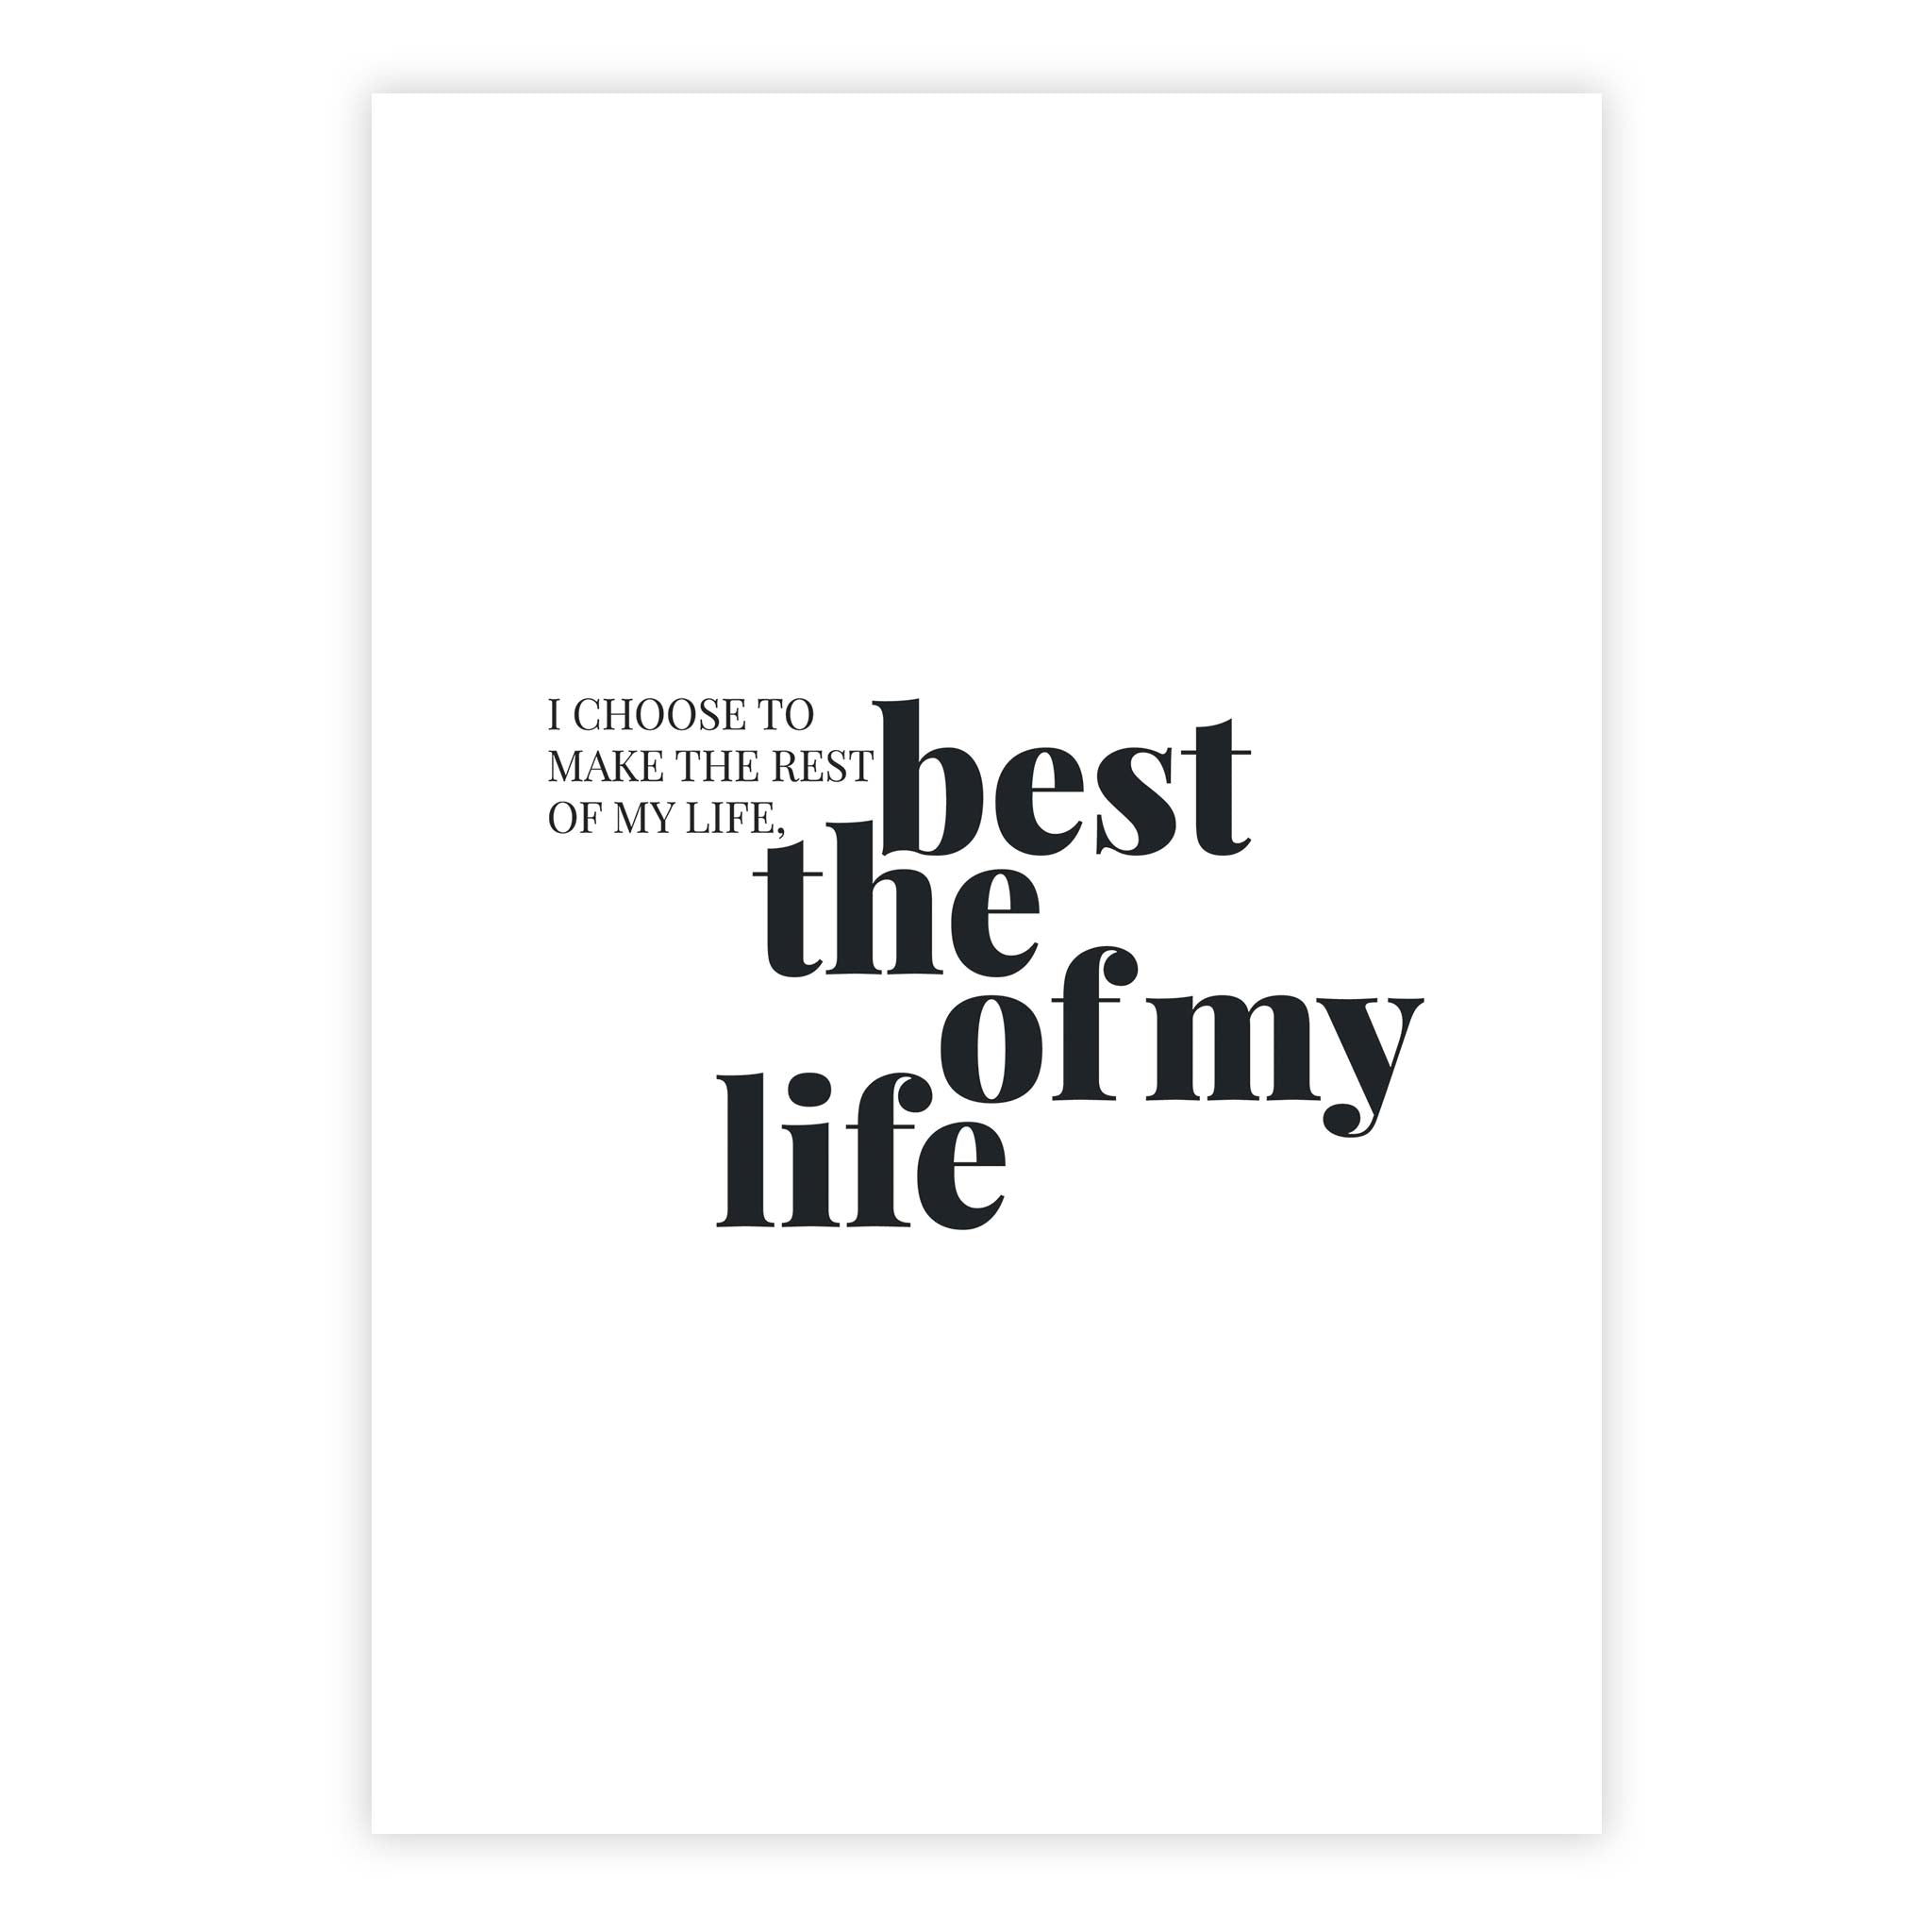 I choose to make the rest of my life, the best of my life